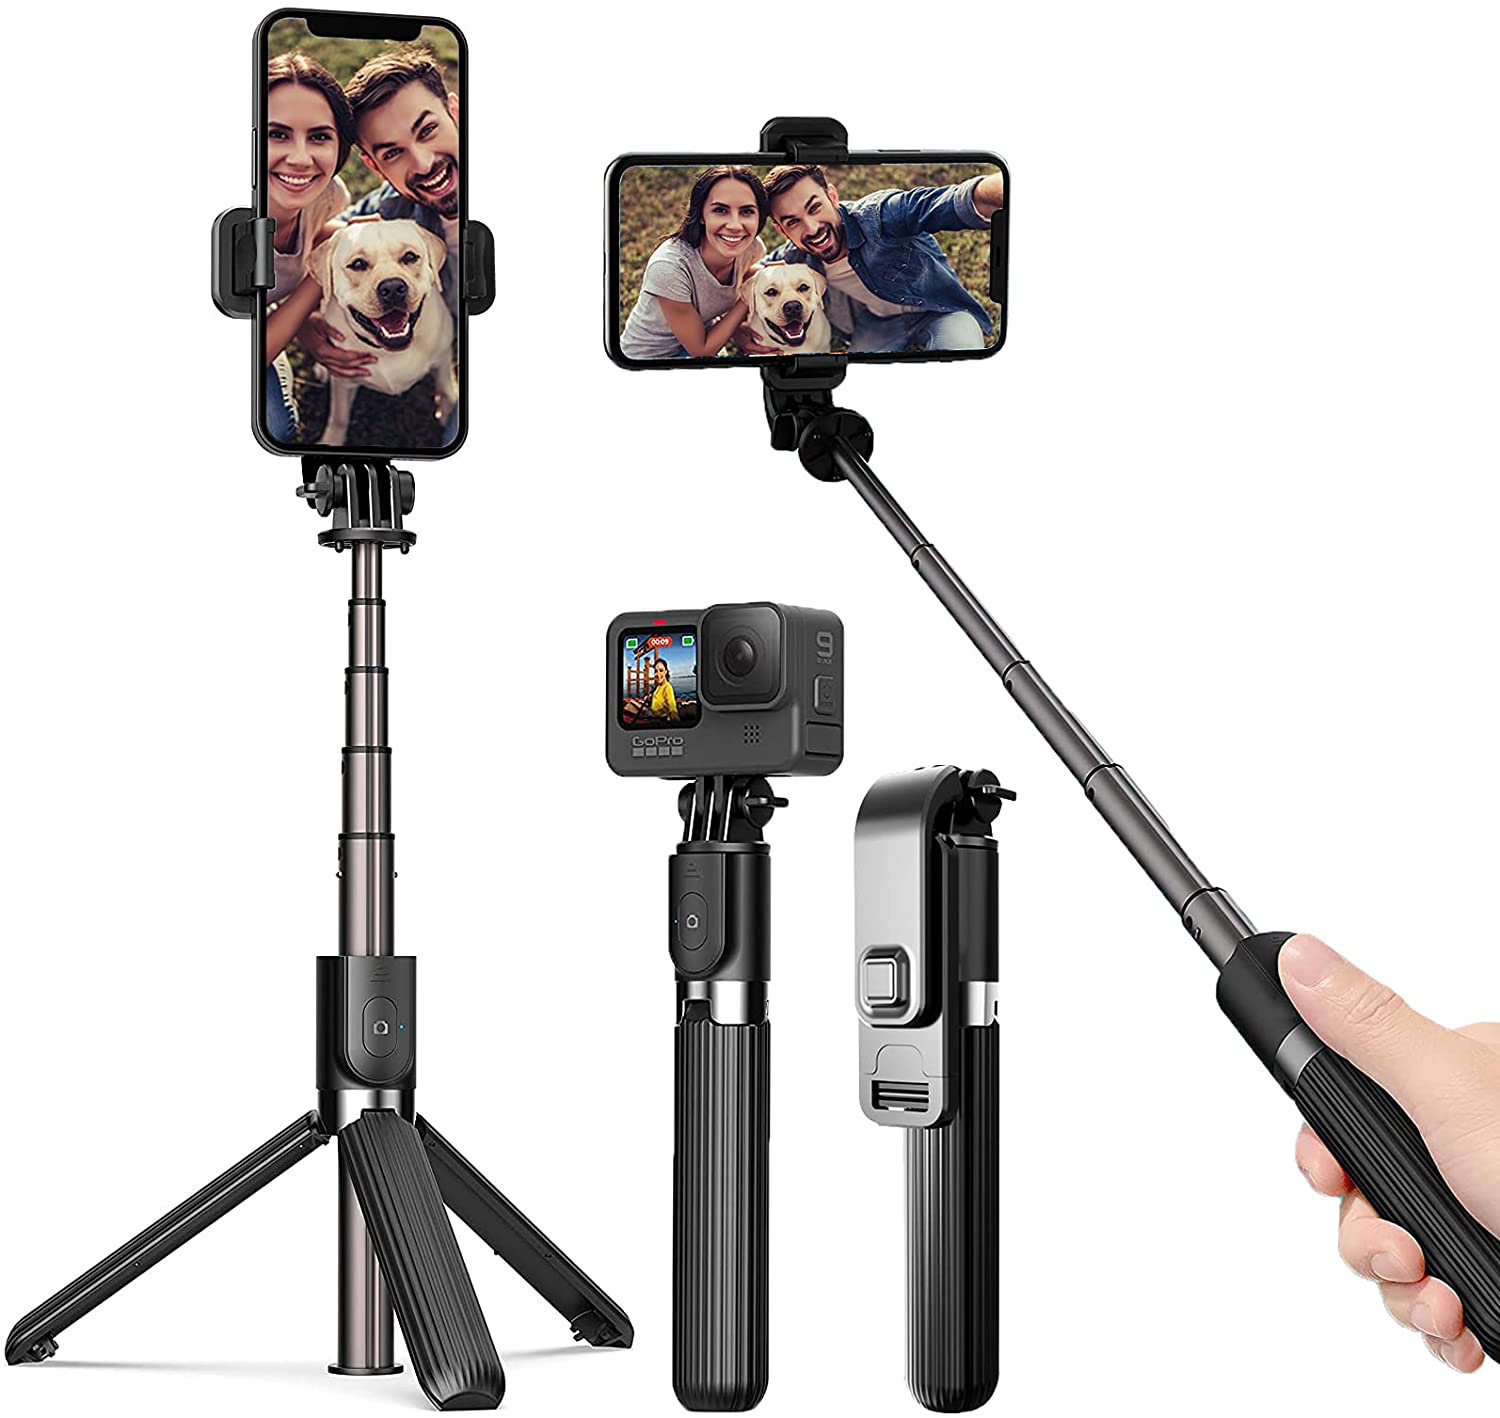 Selfie stick,Multifunction Phone Tripod,Flexible Tripod with Wireless Remote Shutter Compatible with iPhone/Android Samsung,Mini Tripod Stand Holder for Camera GoPro/Mobile Cell Phone 